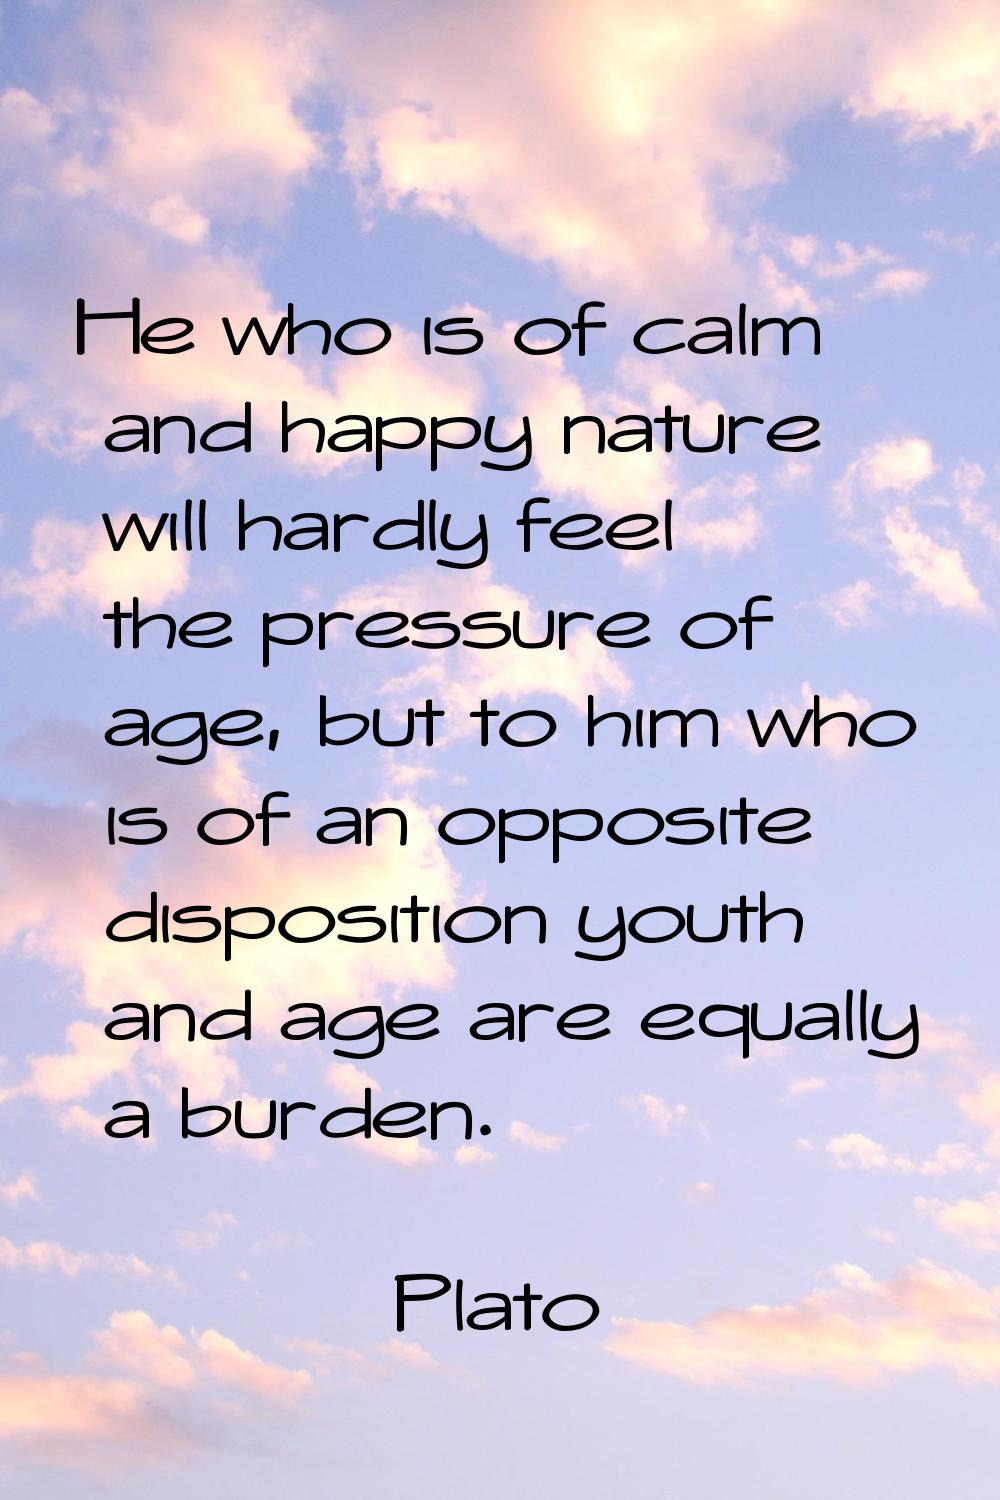 He who is of calm and happy nature will hardly feel the pressure of age, but to him who is of an op